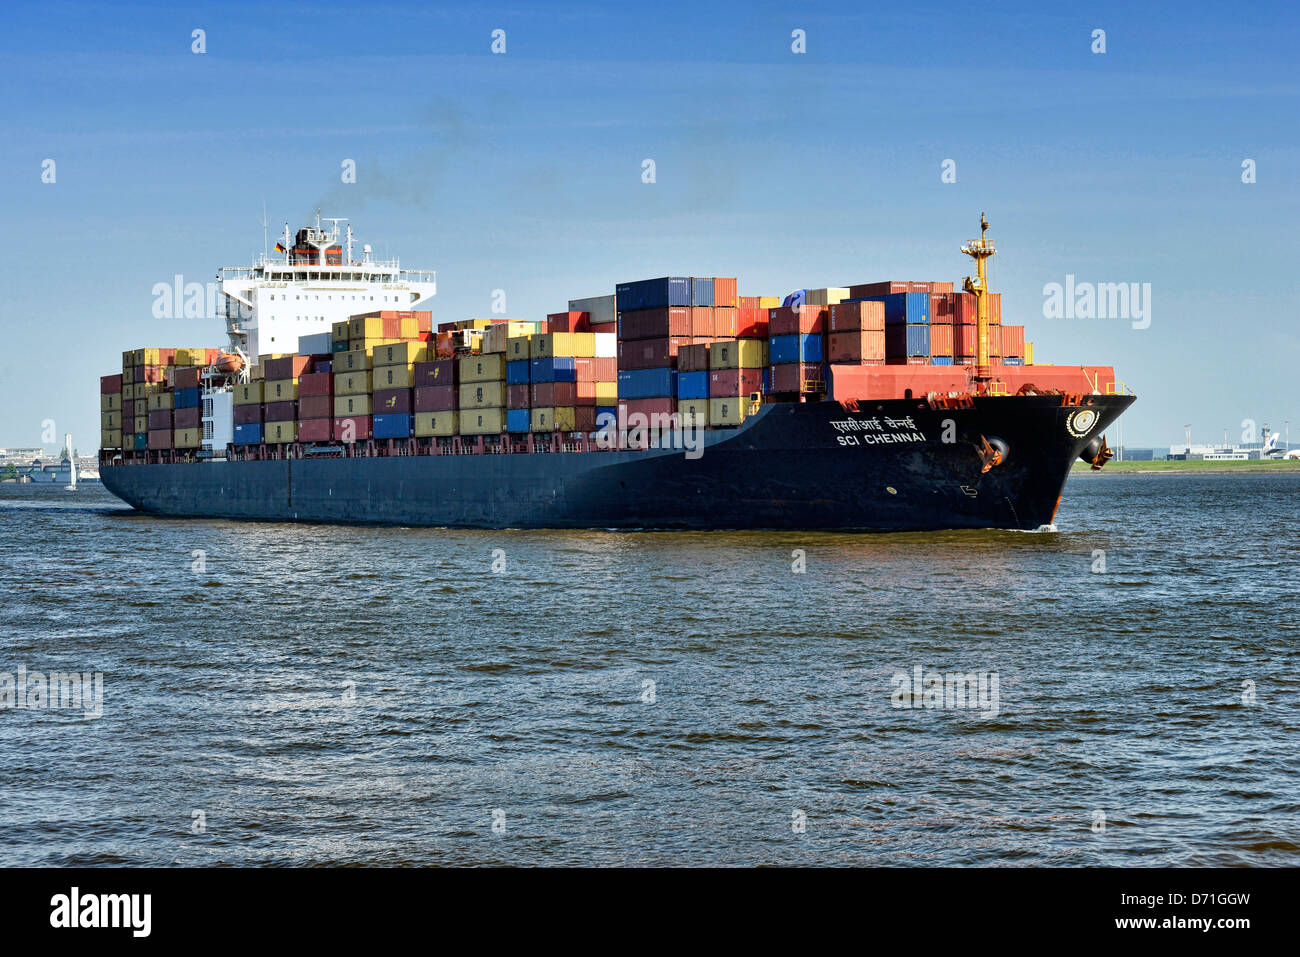 Sci cargo container Chennai dans Blankenese, Hambourg, Allemagne, Europe Banque D'Images